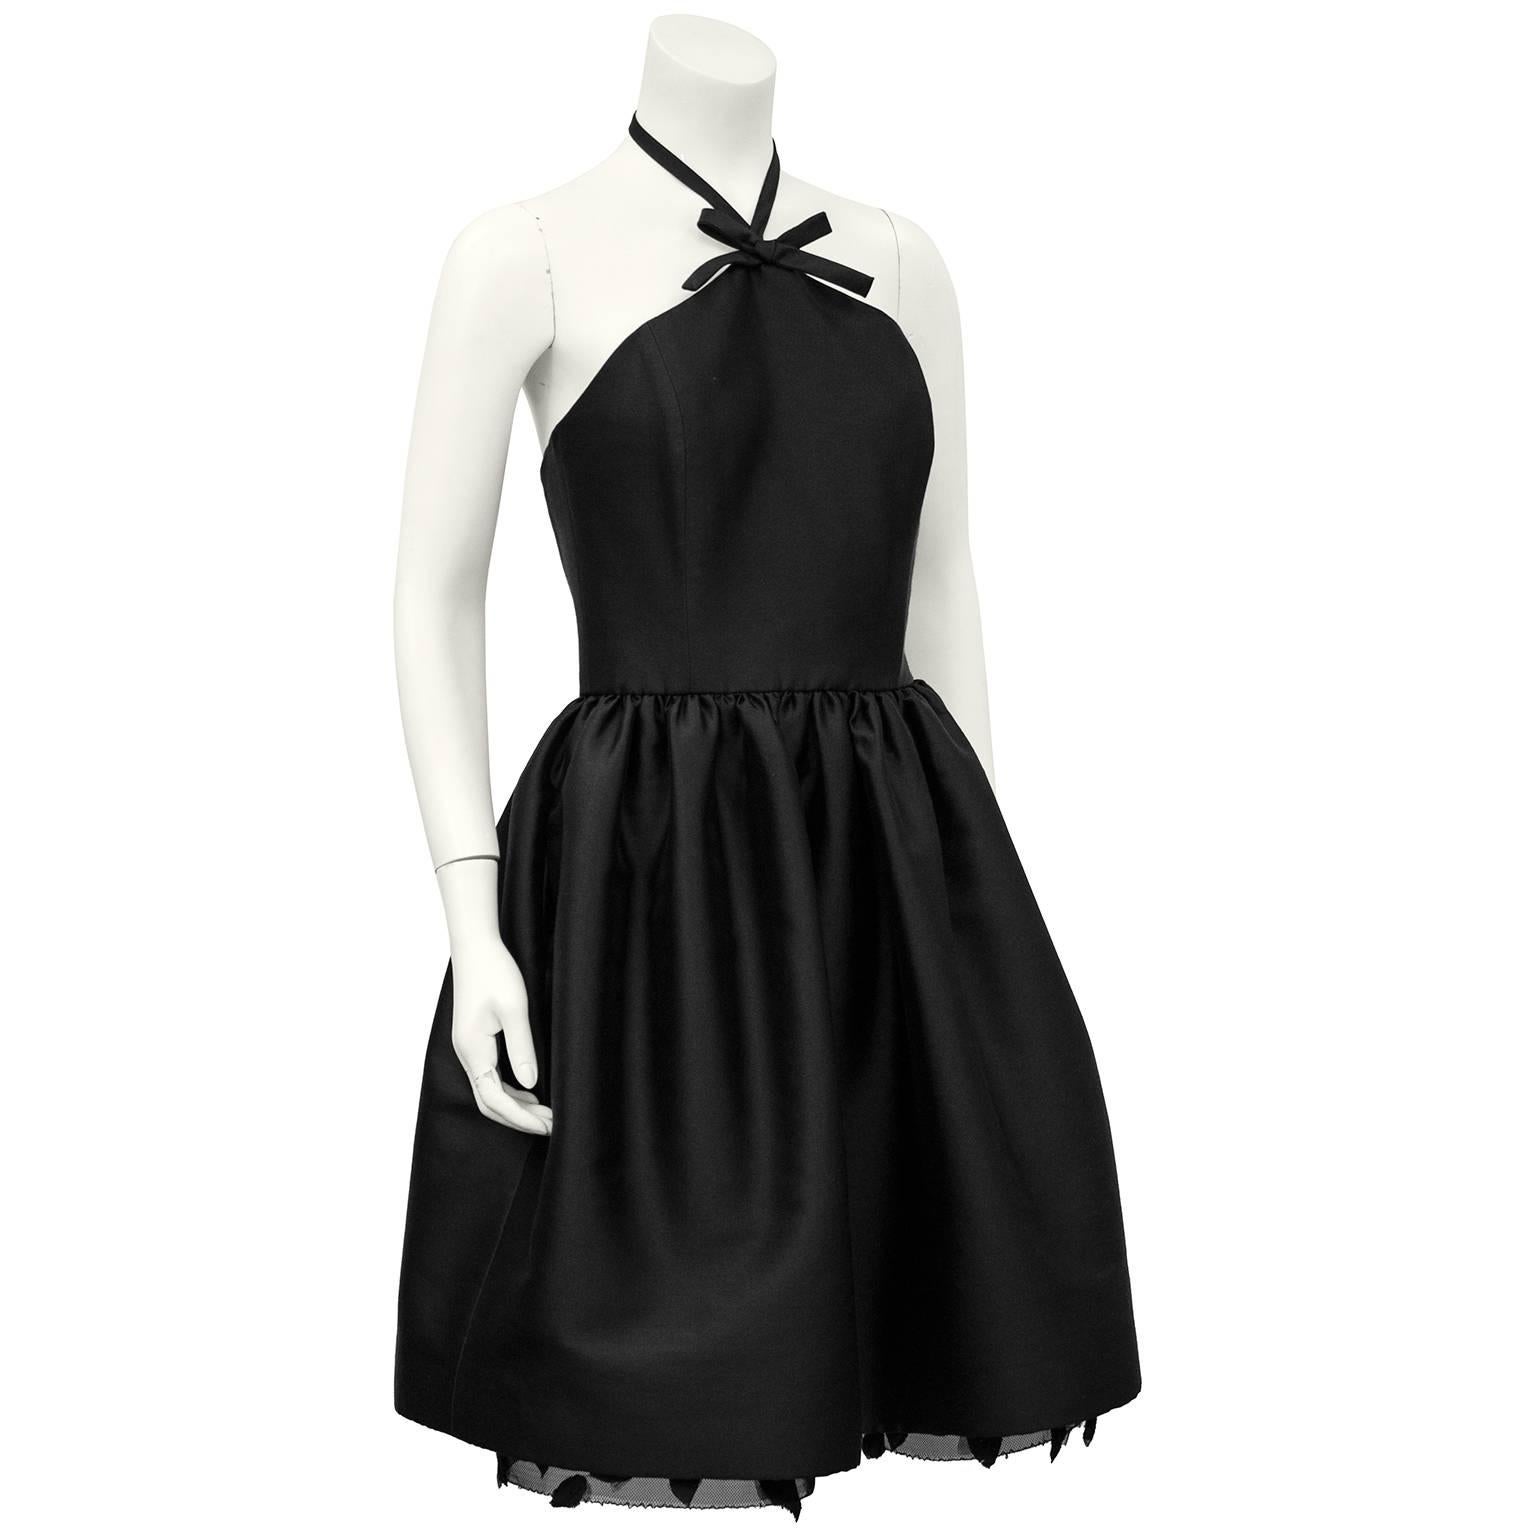 Adorable 1990s Bill Blass Black silk taffeta dress. Halter neck with bow detail, tight bodice and gathered skirt. Black crinoline under skirt with black silk taffeta cut in the shape a small leaves. Excellent unworn condition. Retailed for $2250.